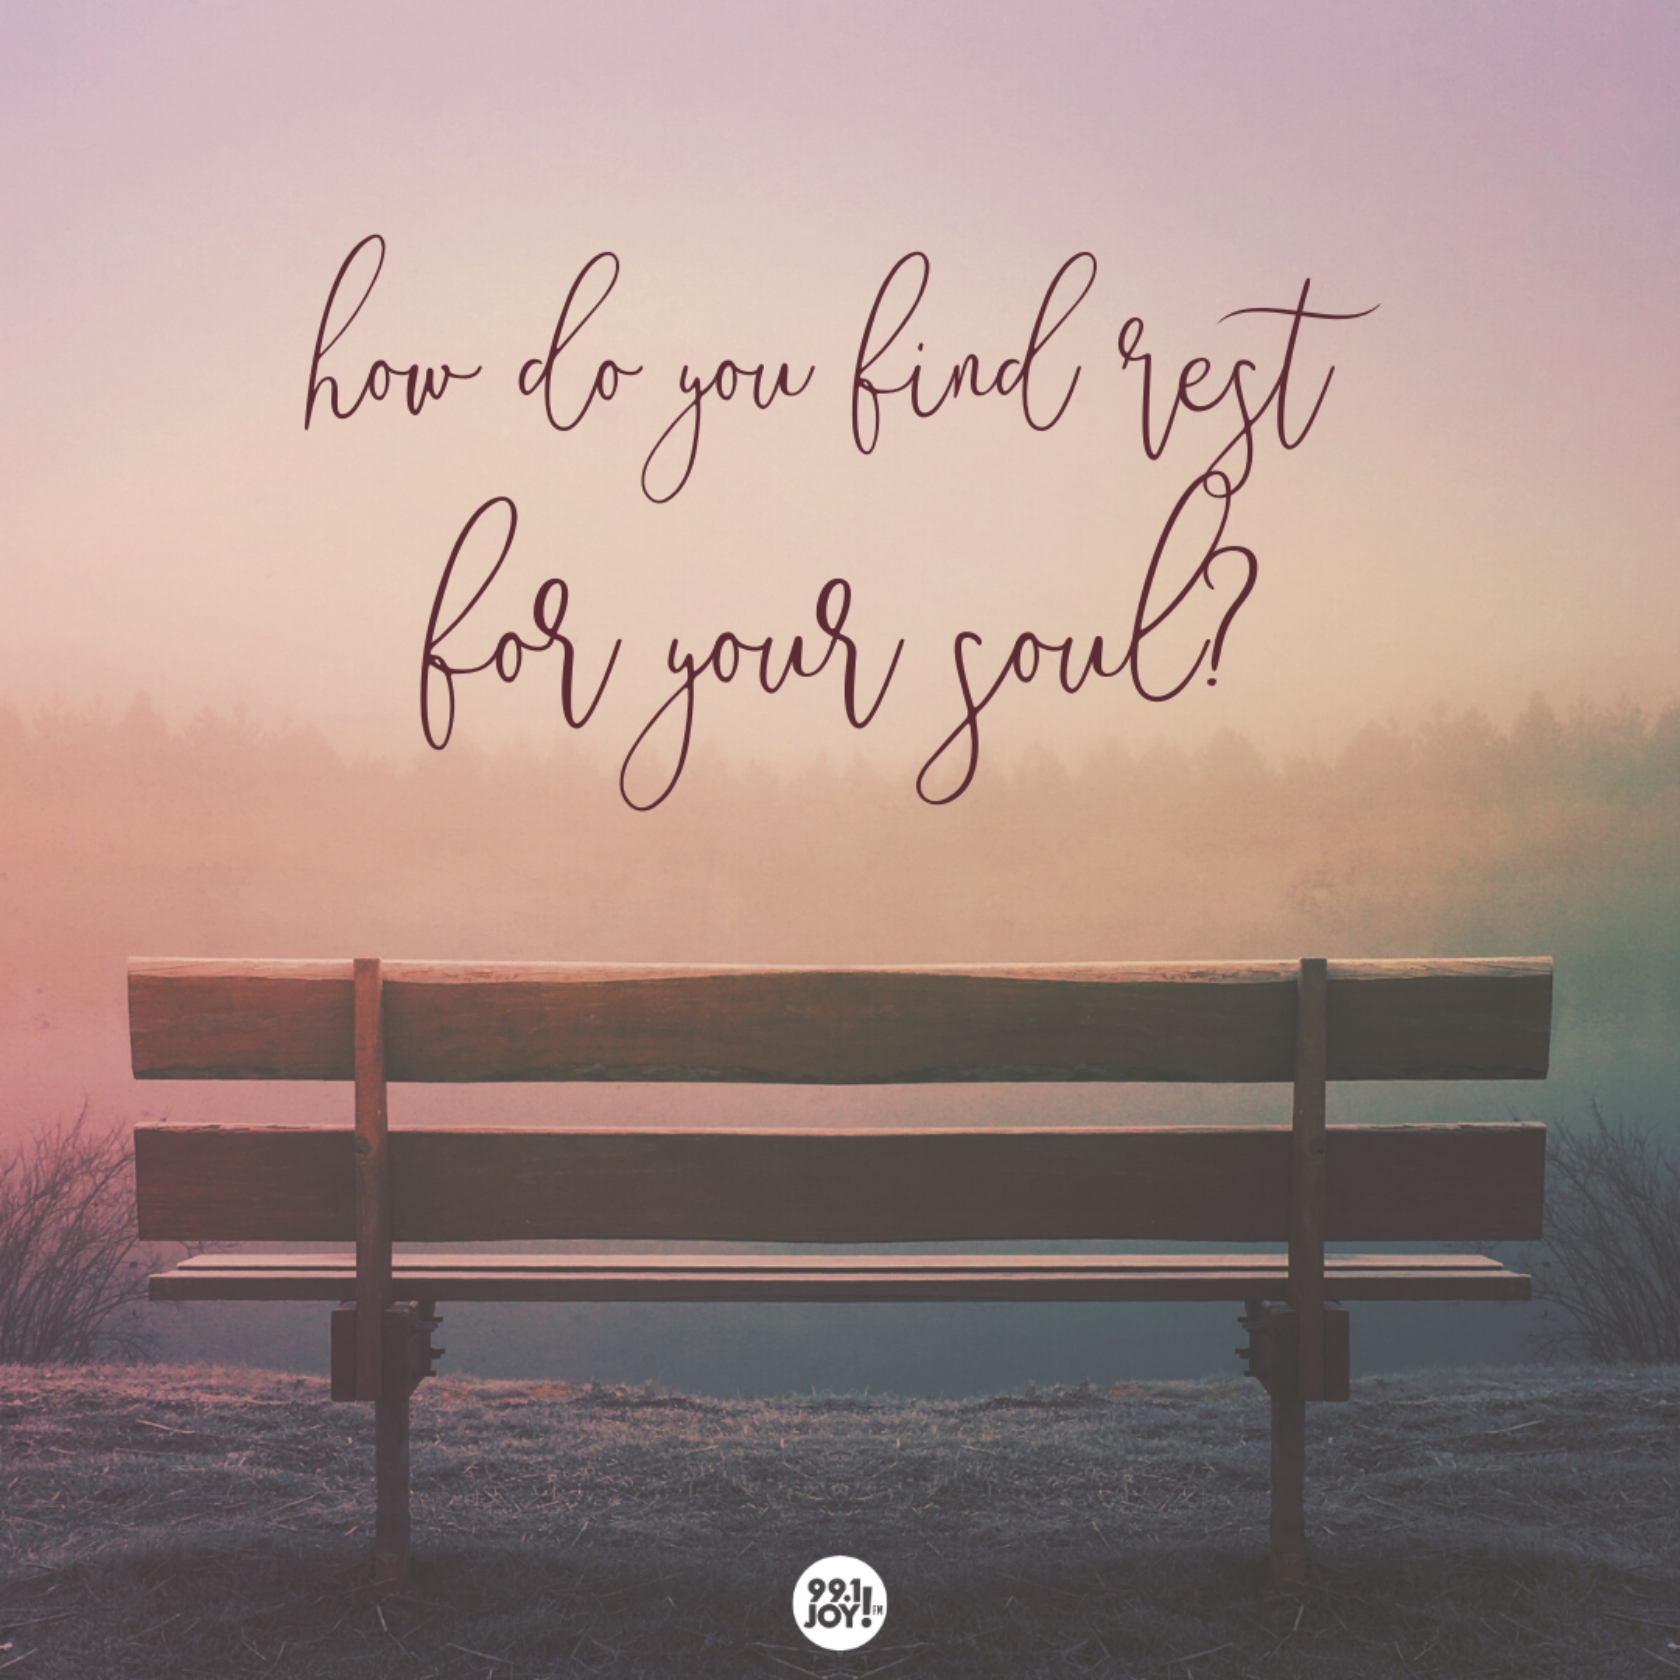 How Do You Find Rest For Your Soul?